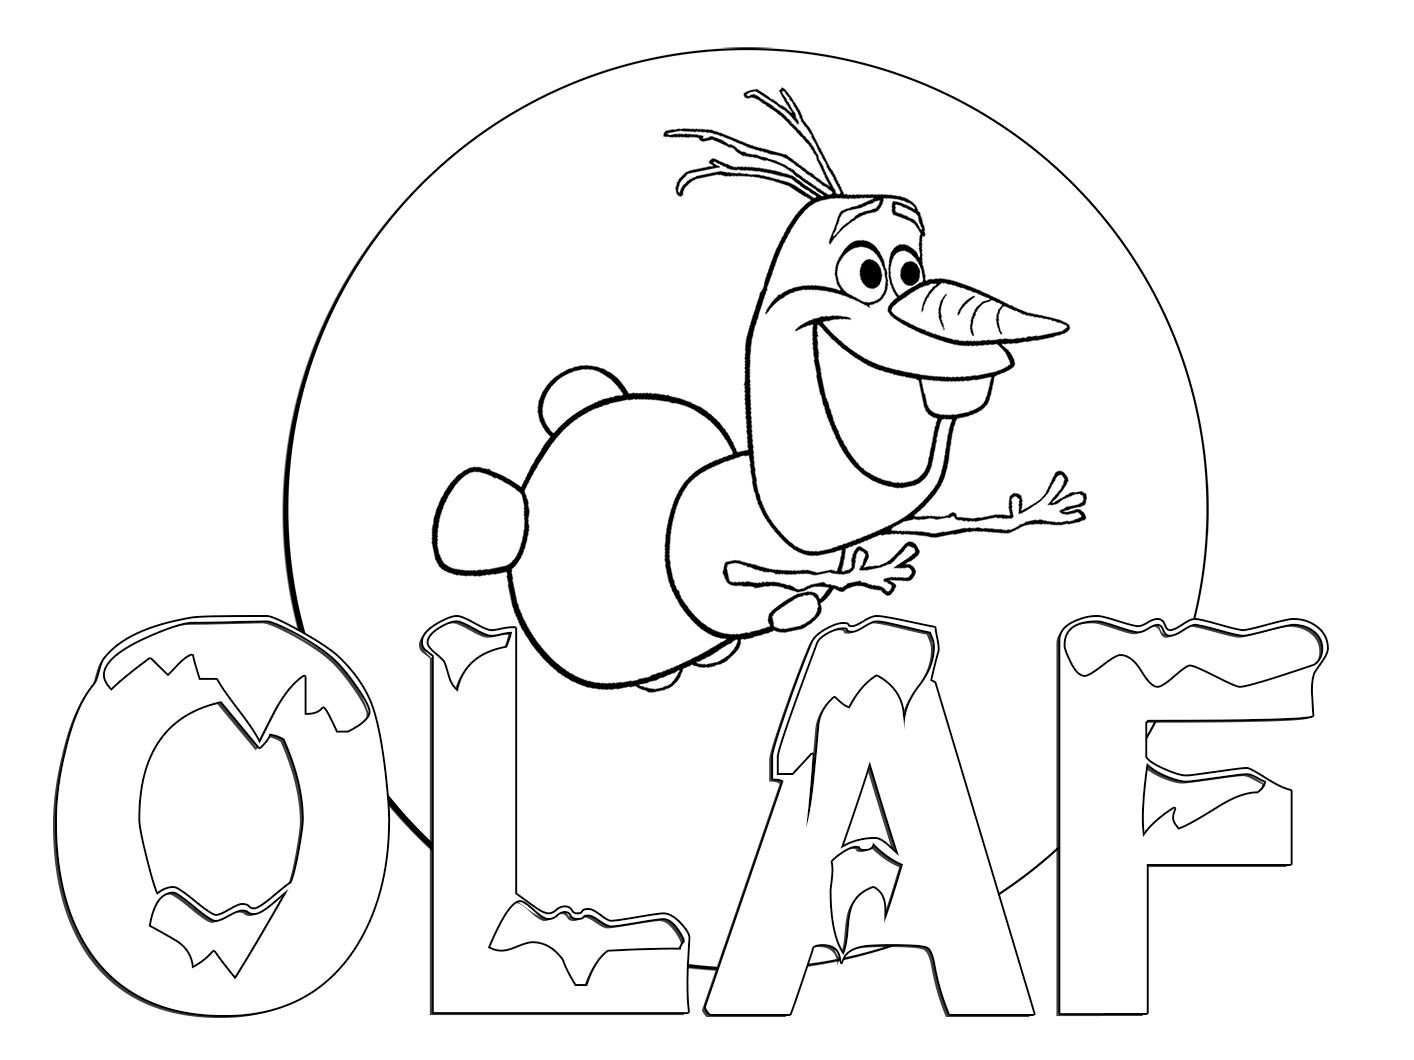 Frozen 2 Coloring Pages at GetColorings.com | Free ...